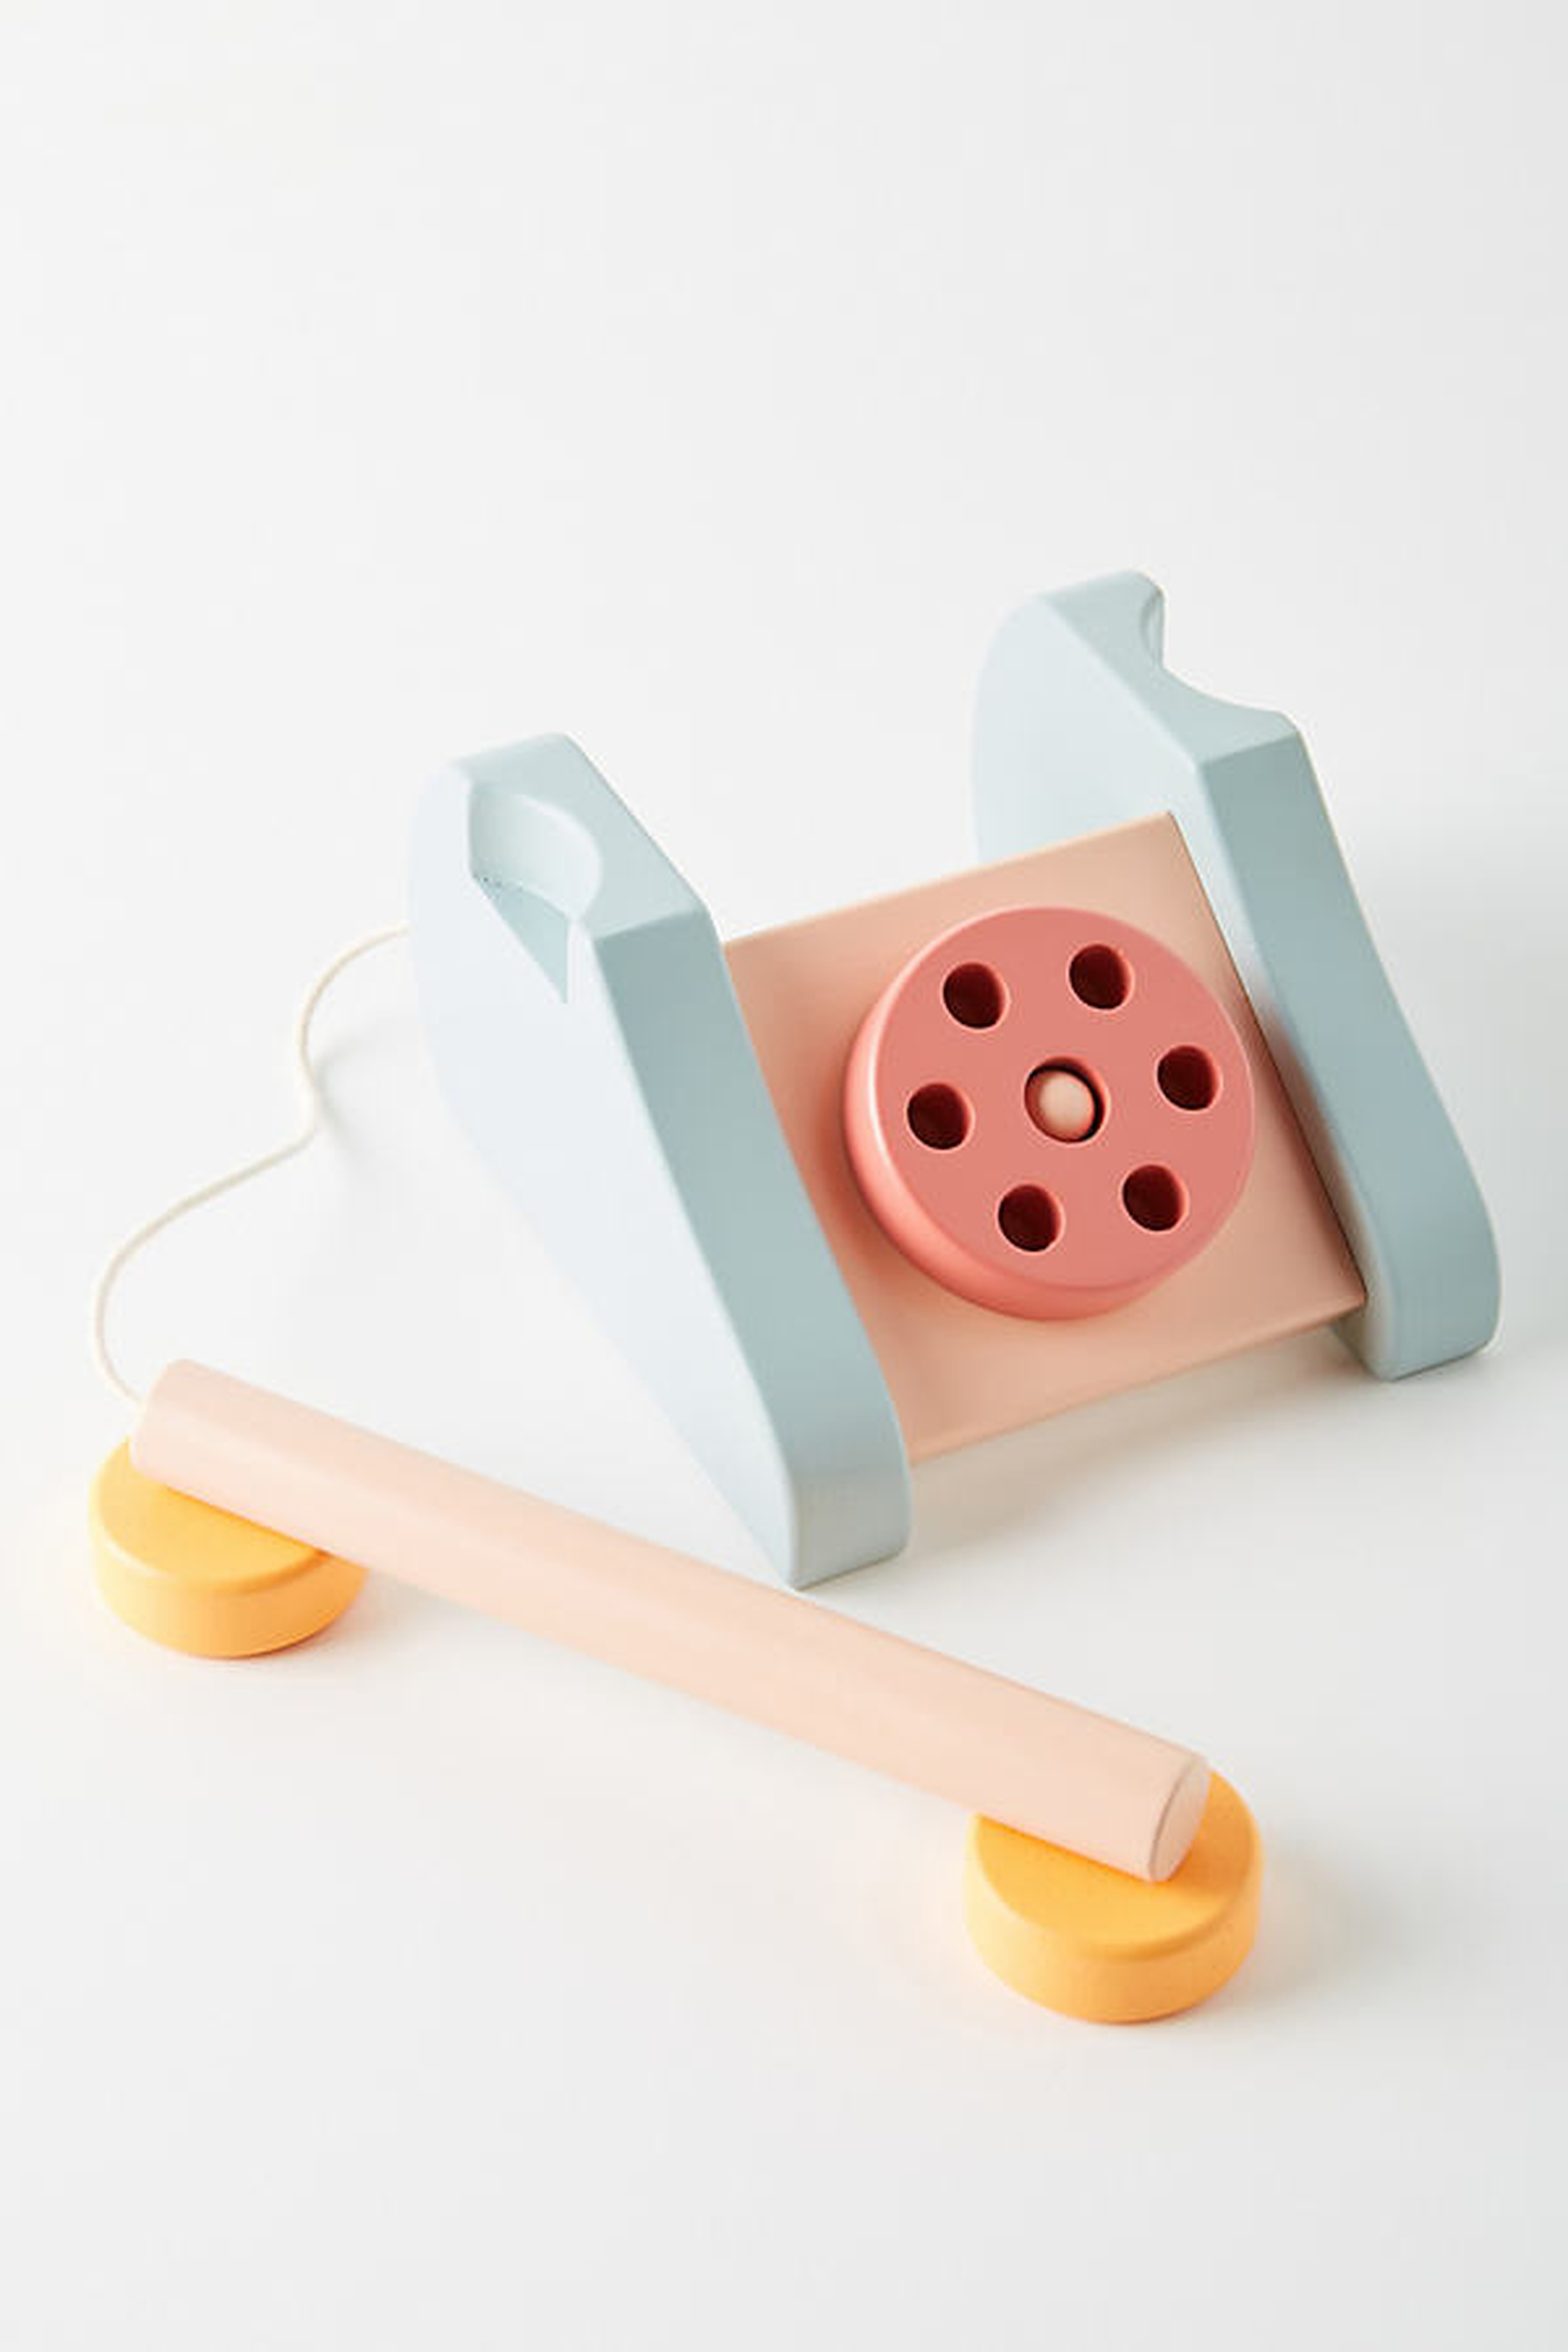 Wooden Telephone Toy By Anthropologie in Assorted - Anthropologie